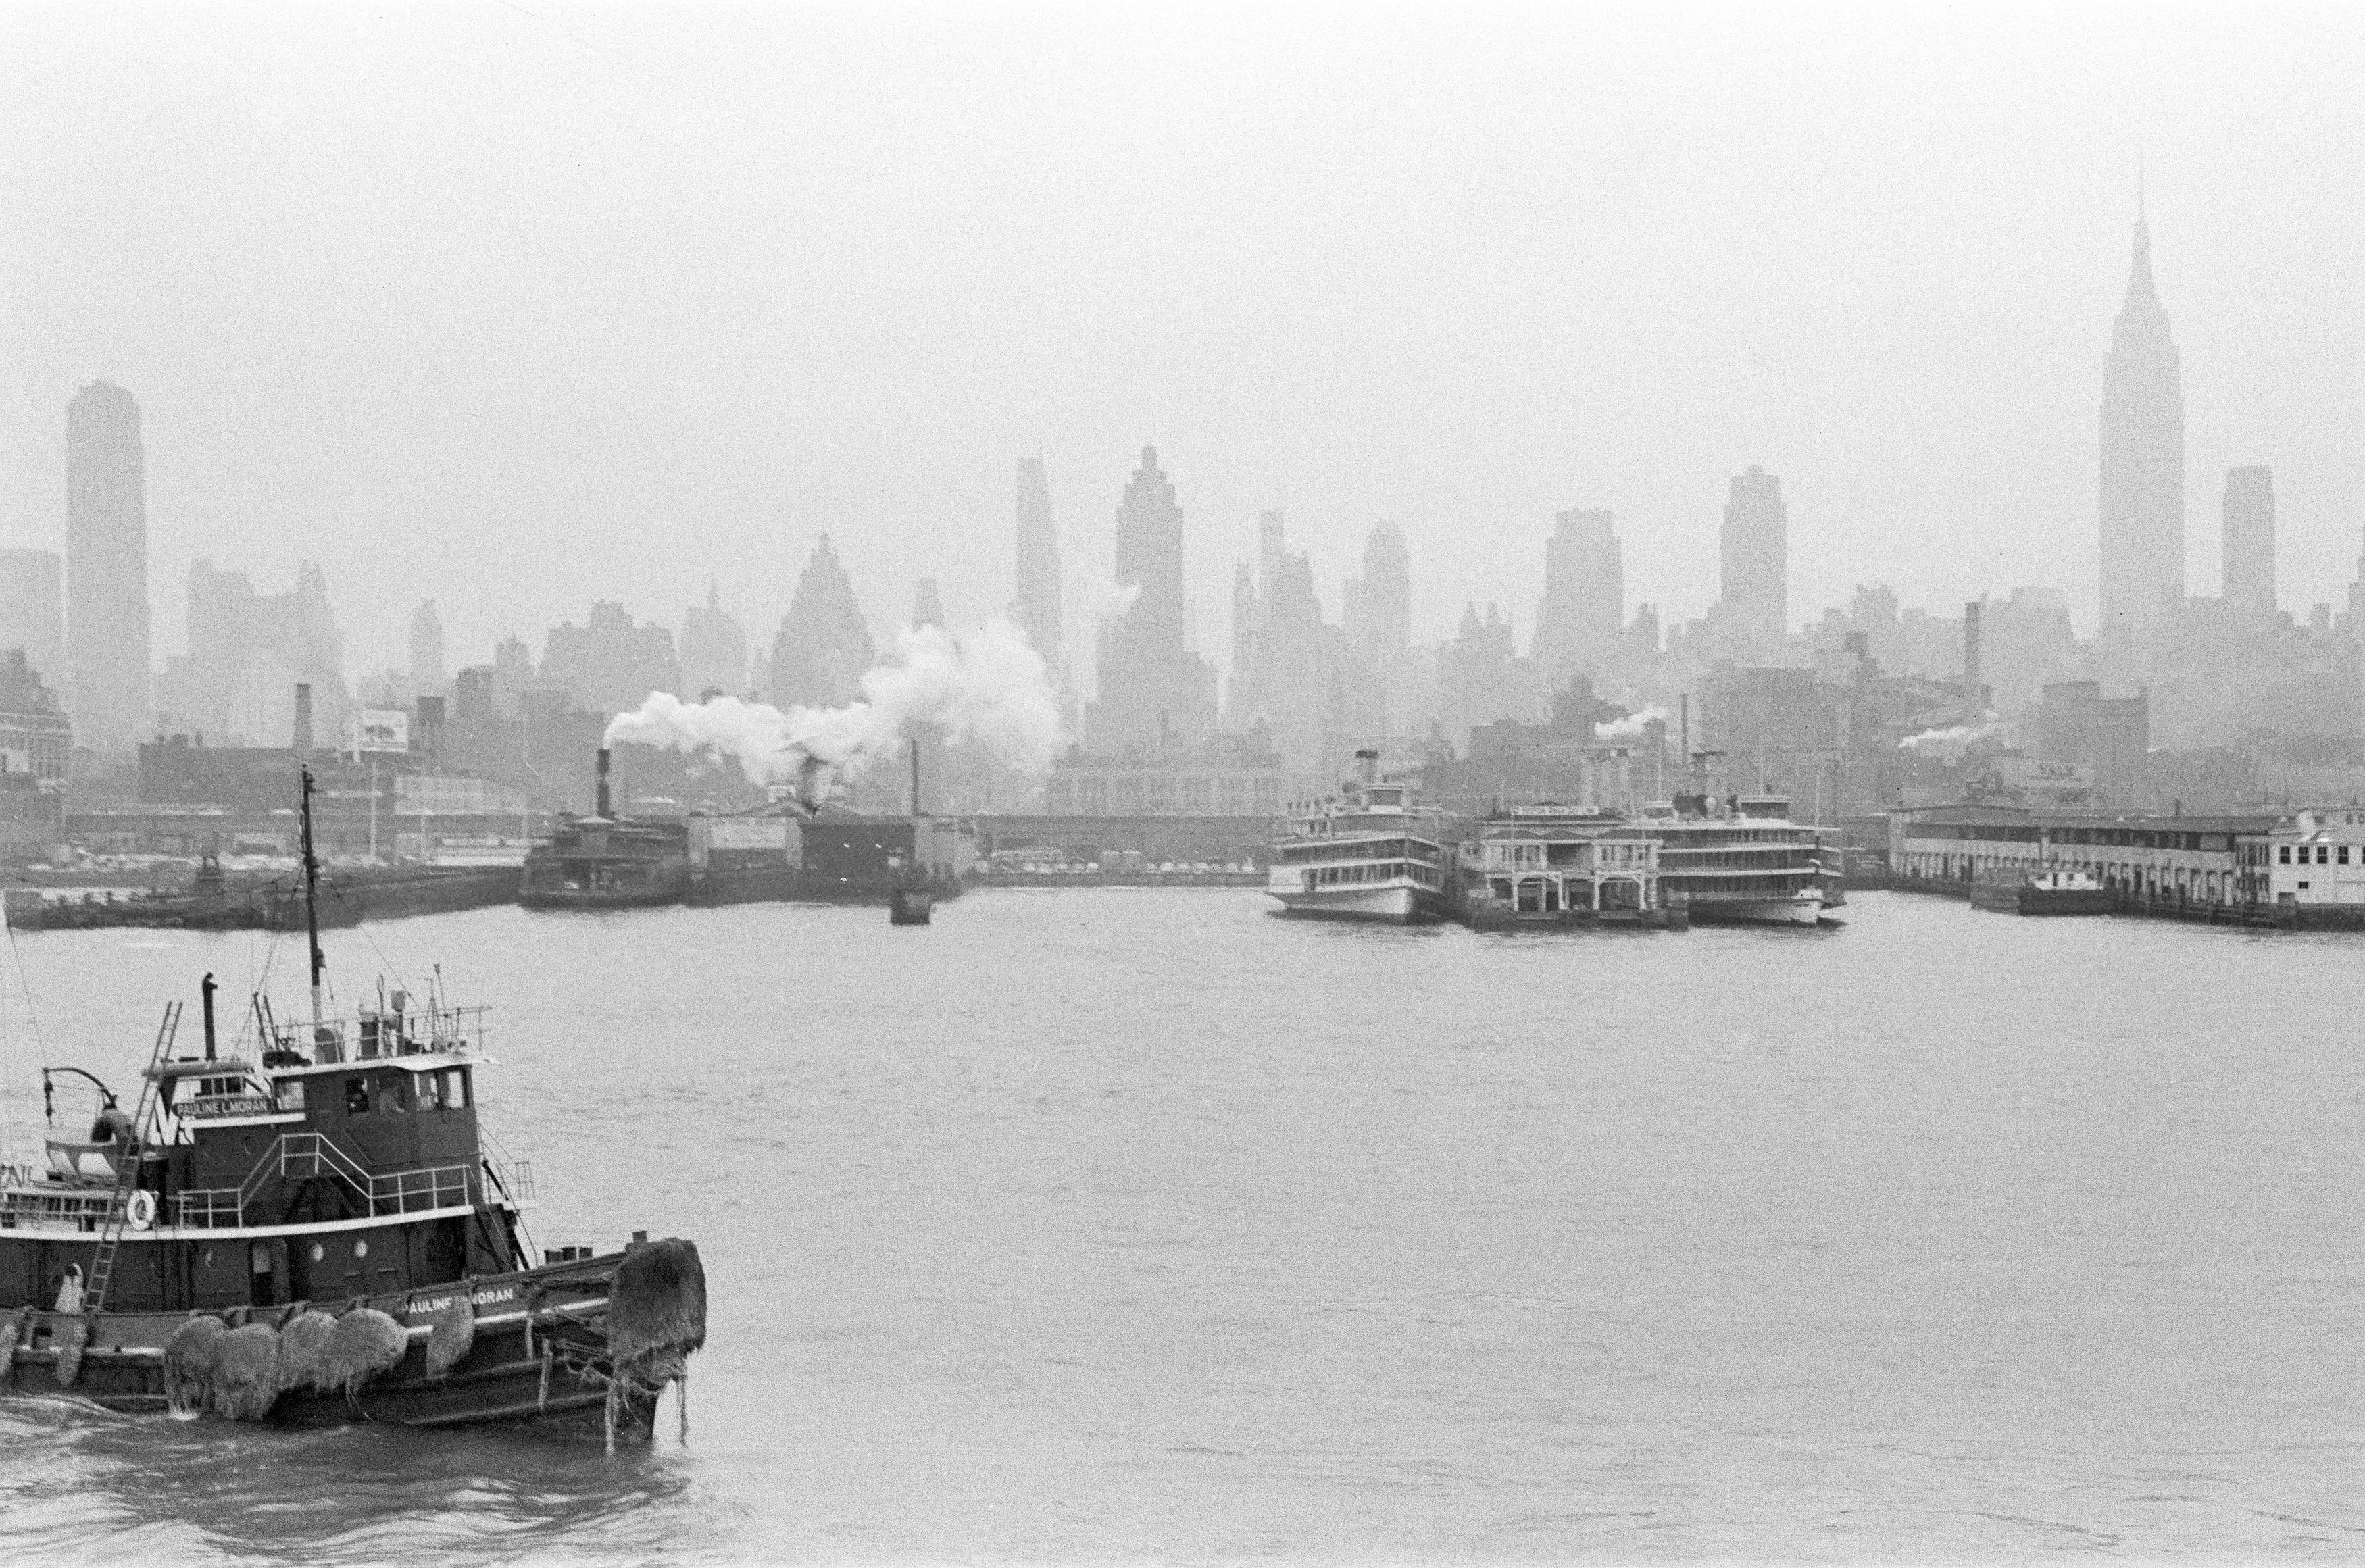 Harbour's Skyline of New York, 1956 - Contemporary Black & White Photography